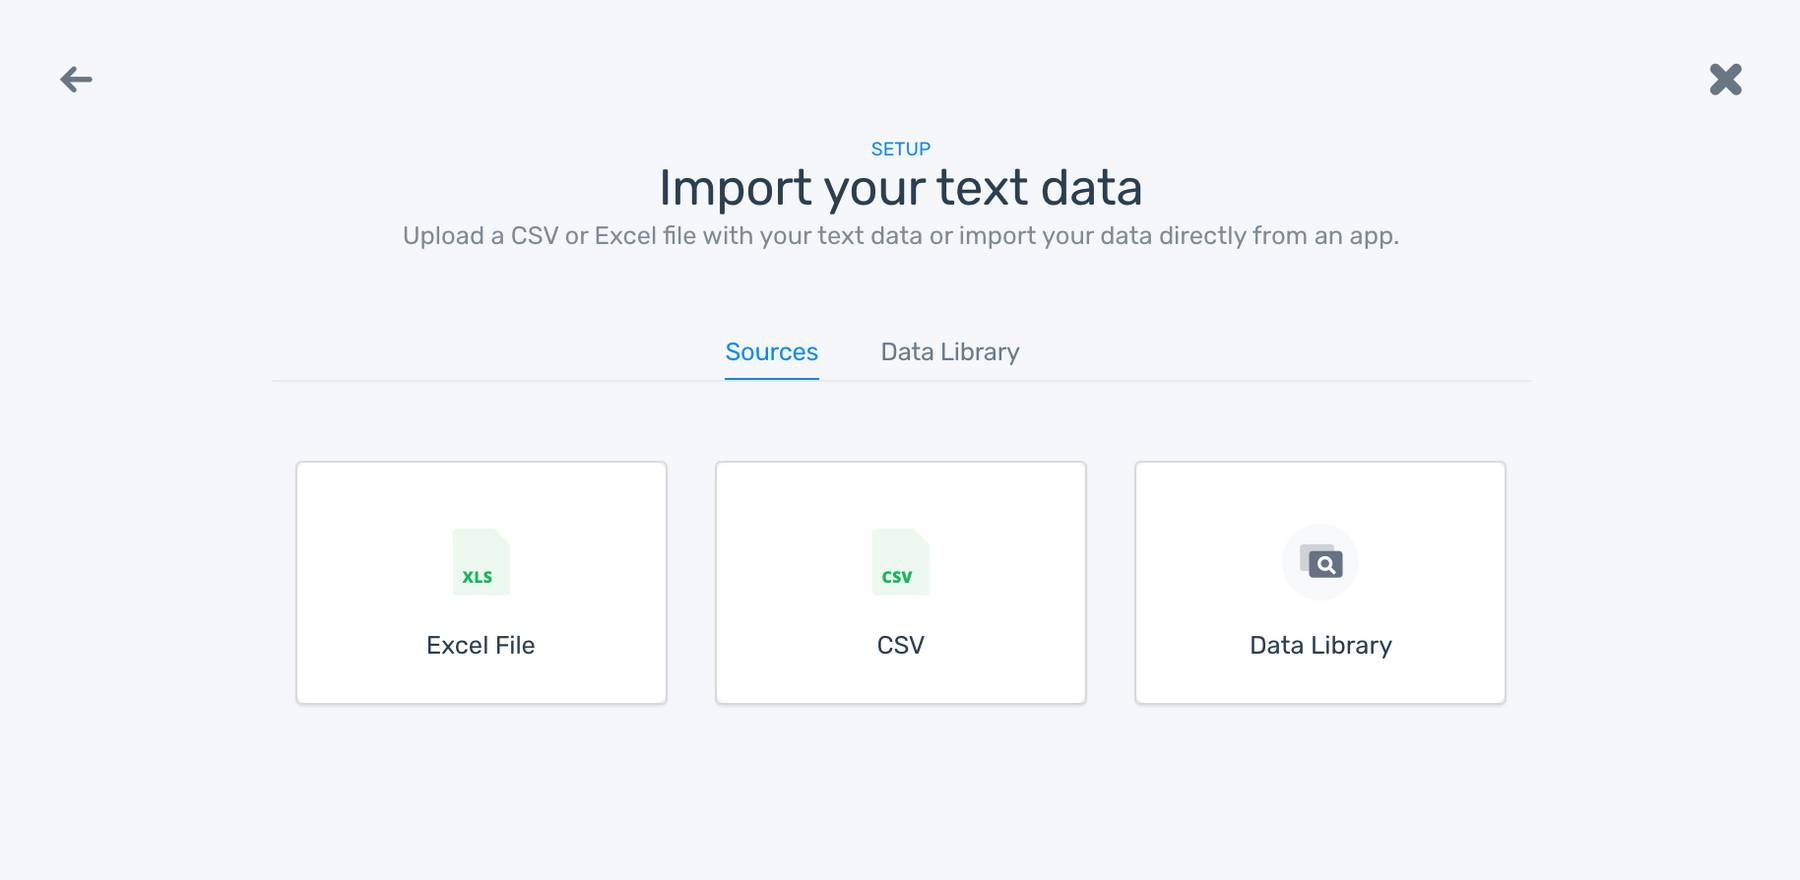 Model builder: the step to import Twitter data by uploading an Excel or CSV file